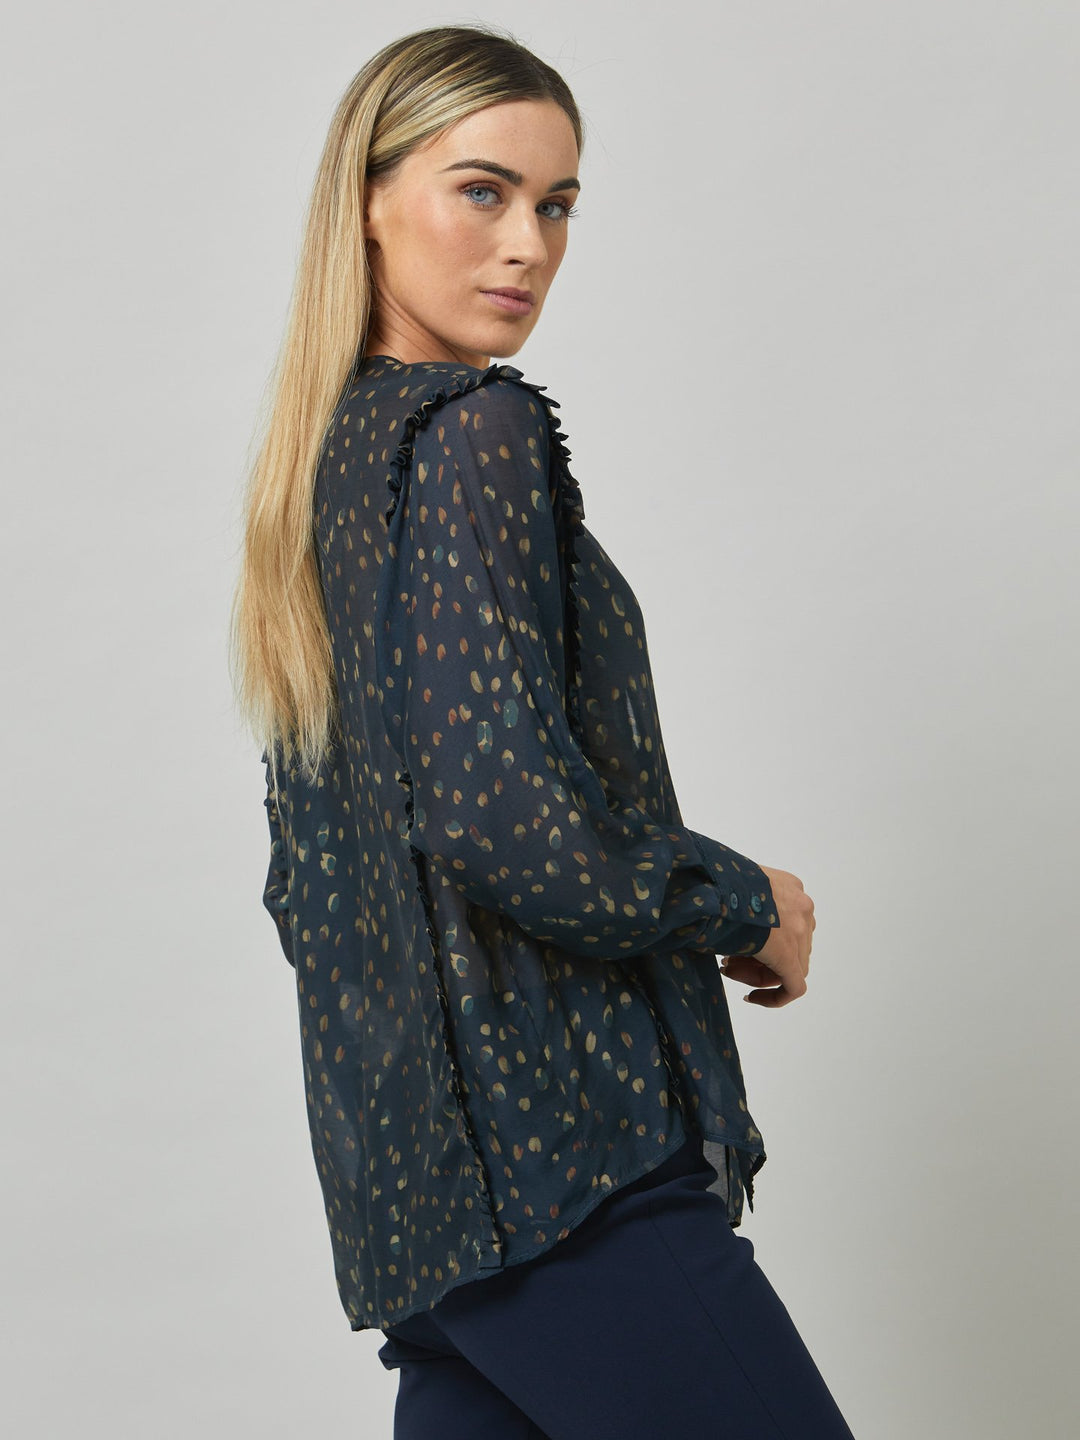 Elevate your day edits with the Lauren jewel neck blouse, a stylish upgrade to your wardrobe. Crafted from a luxurious silk blend with a soft touch, it features an enchanting abstract teal print with hints of camel. The easy silhouette of this blouse is enhanced by a discreet ruffle that gracefully runs from hem to hem over the shoulder, adding a touch of feminine charm. Experience effortless elegance with the Lauren blouse.